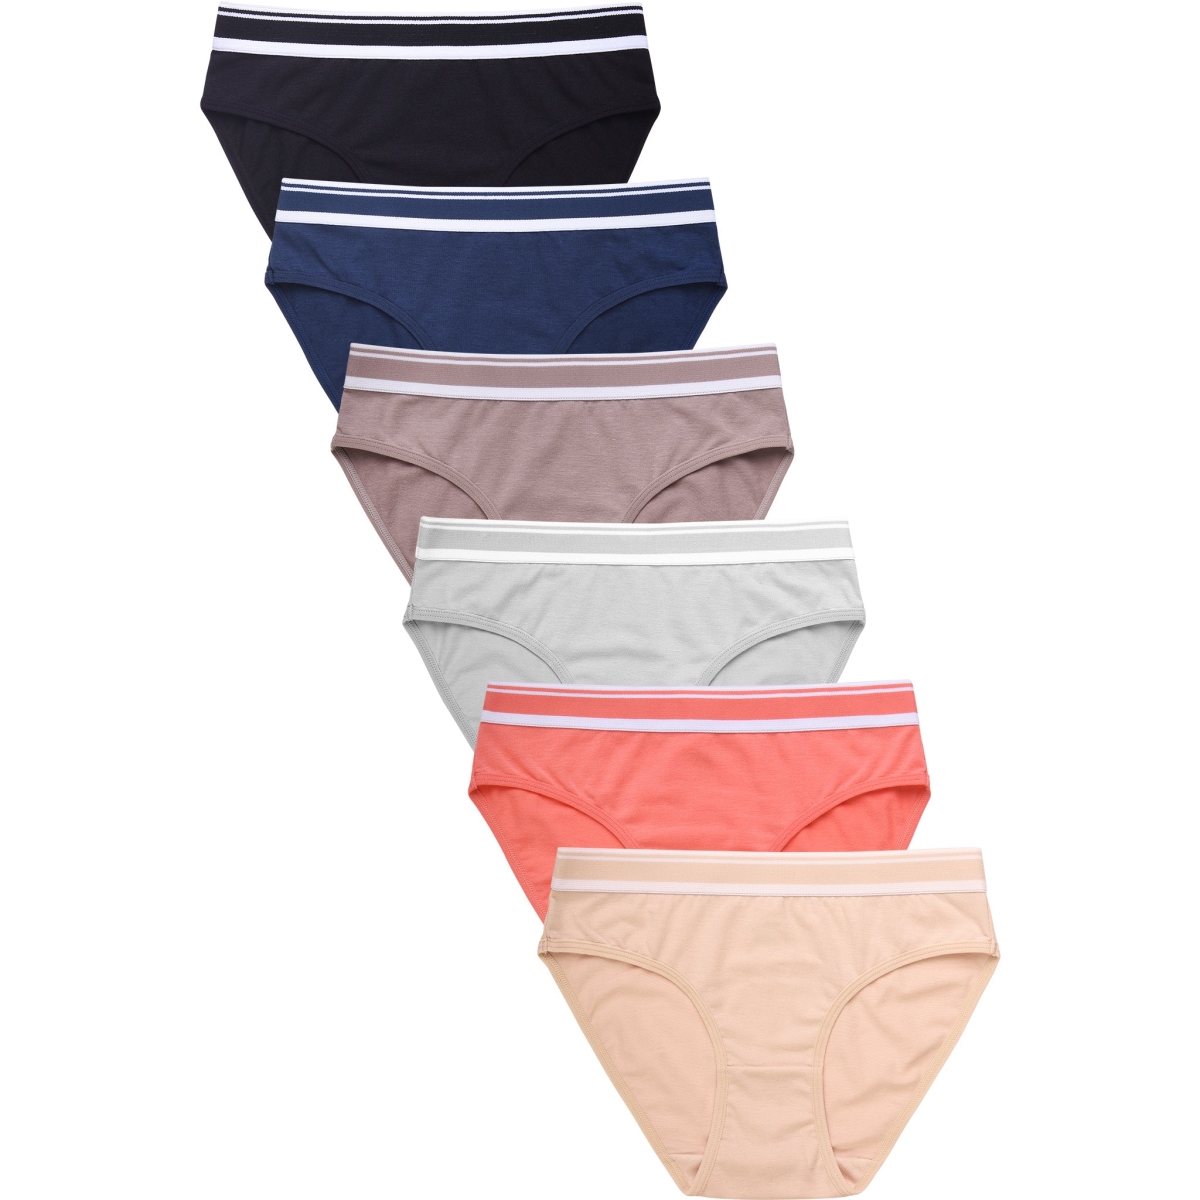 Picture of 247 Frenzy 247-LP1431CK4-XL Sofra Womens Essentials Cotton Stretch Bikini Panty Underwear - Assorted Color - Extra Large - Pack of 6